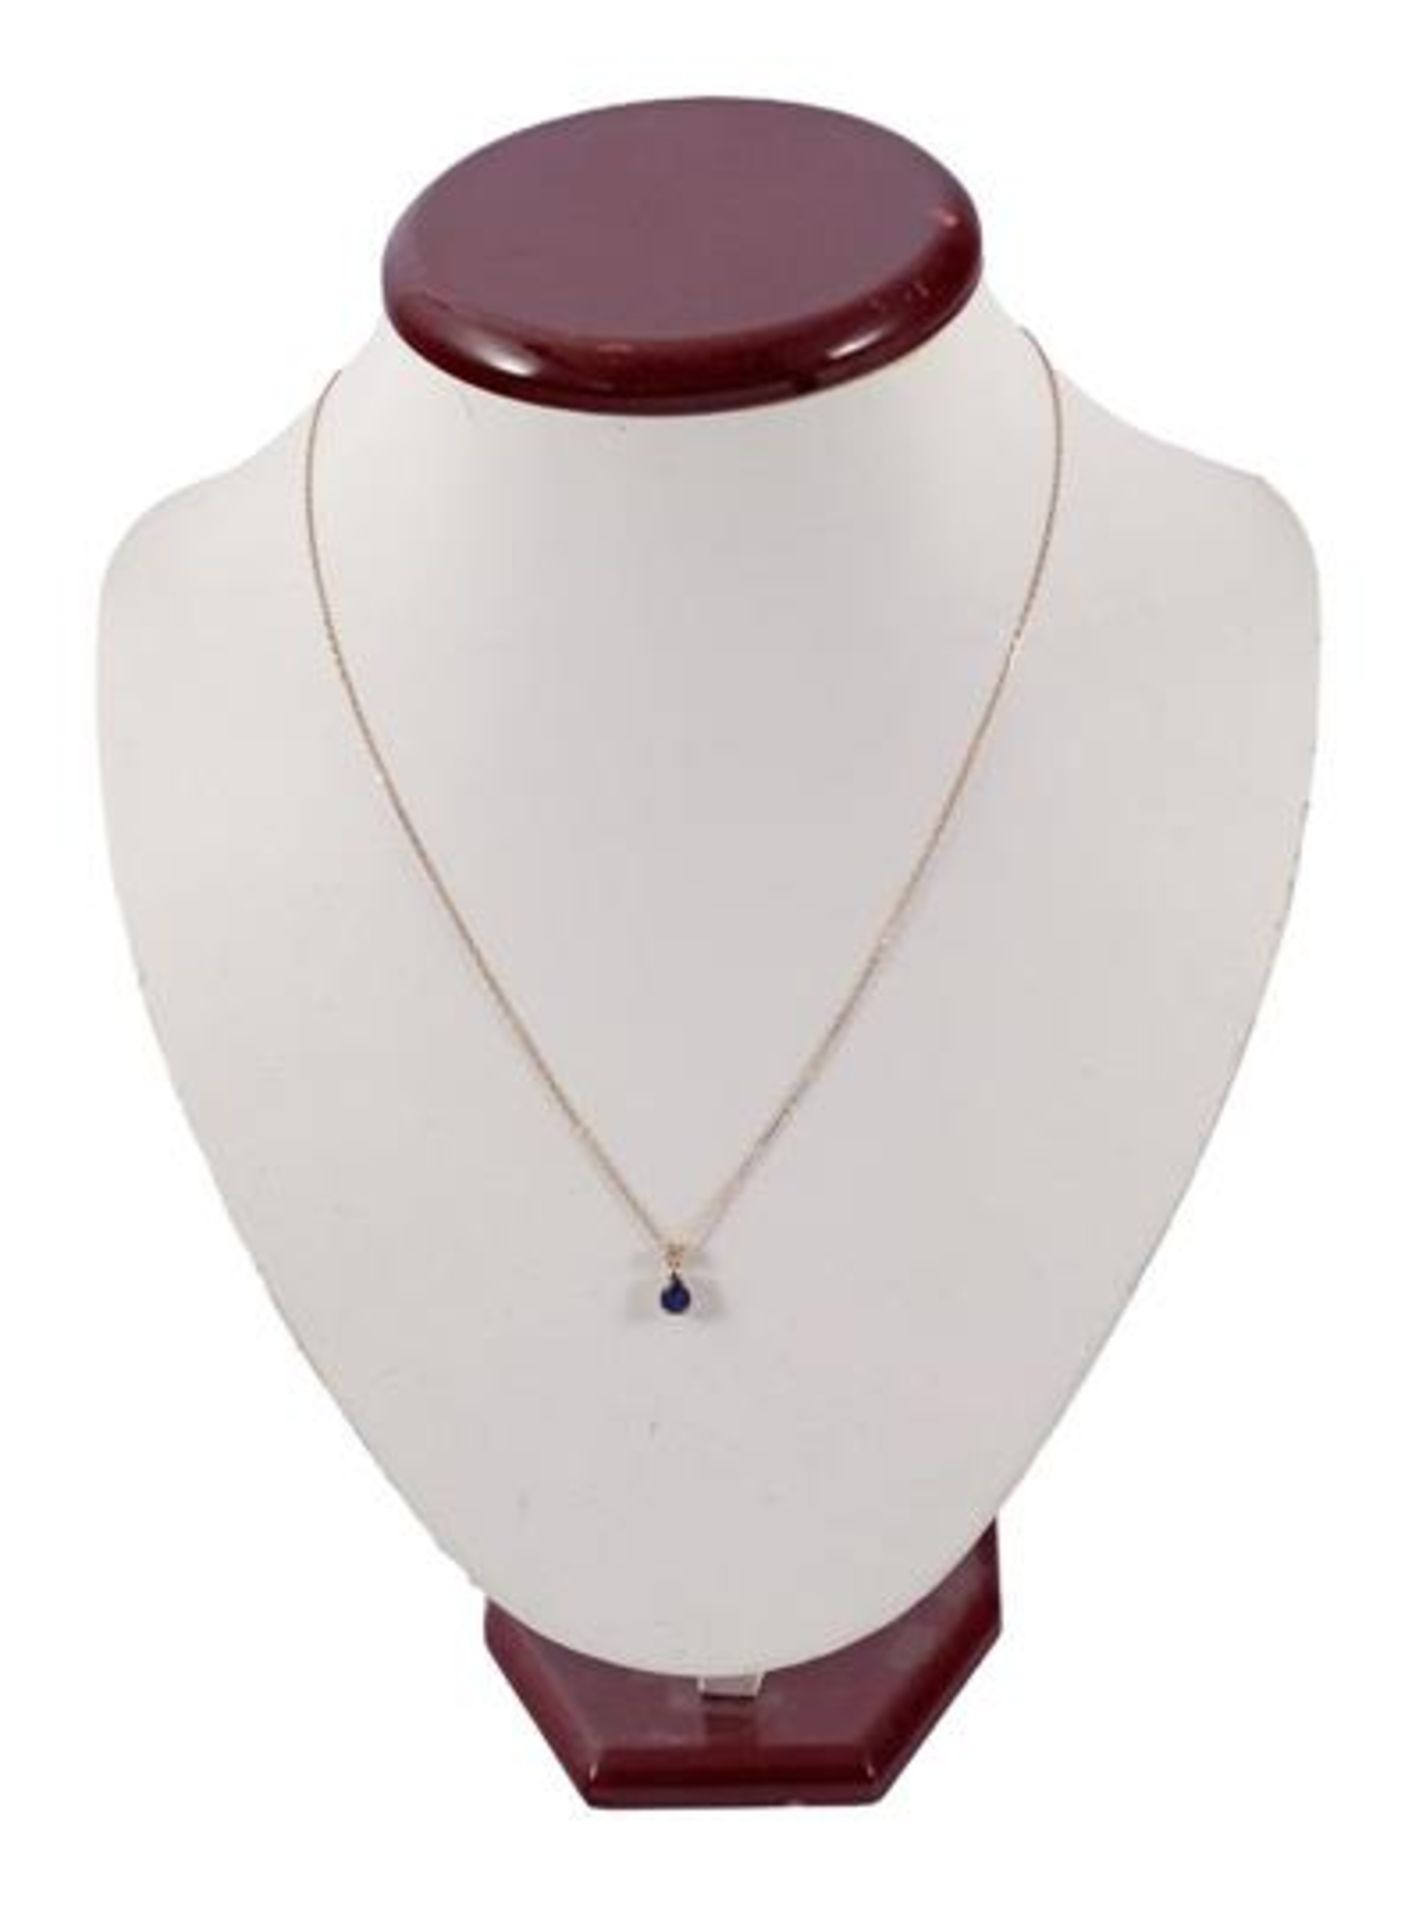 Rose gold necklace, 14 kt., 50 cm long, with a pendant, marked 585, set with sapphire approx. 0.85